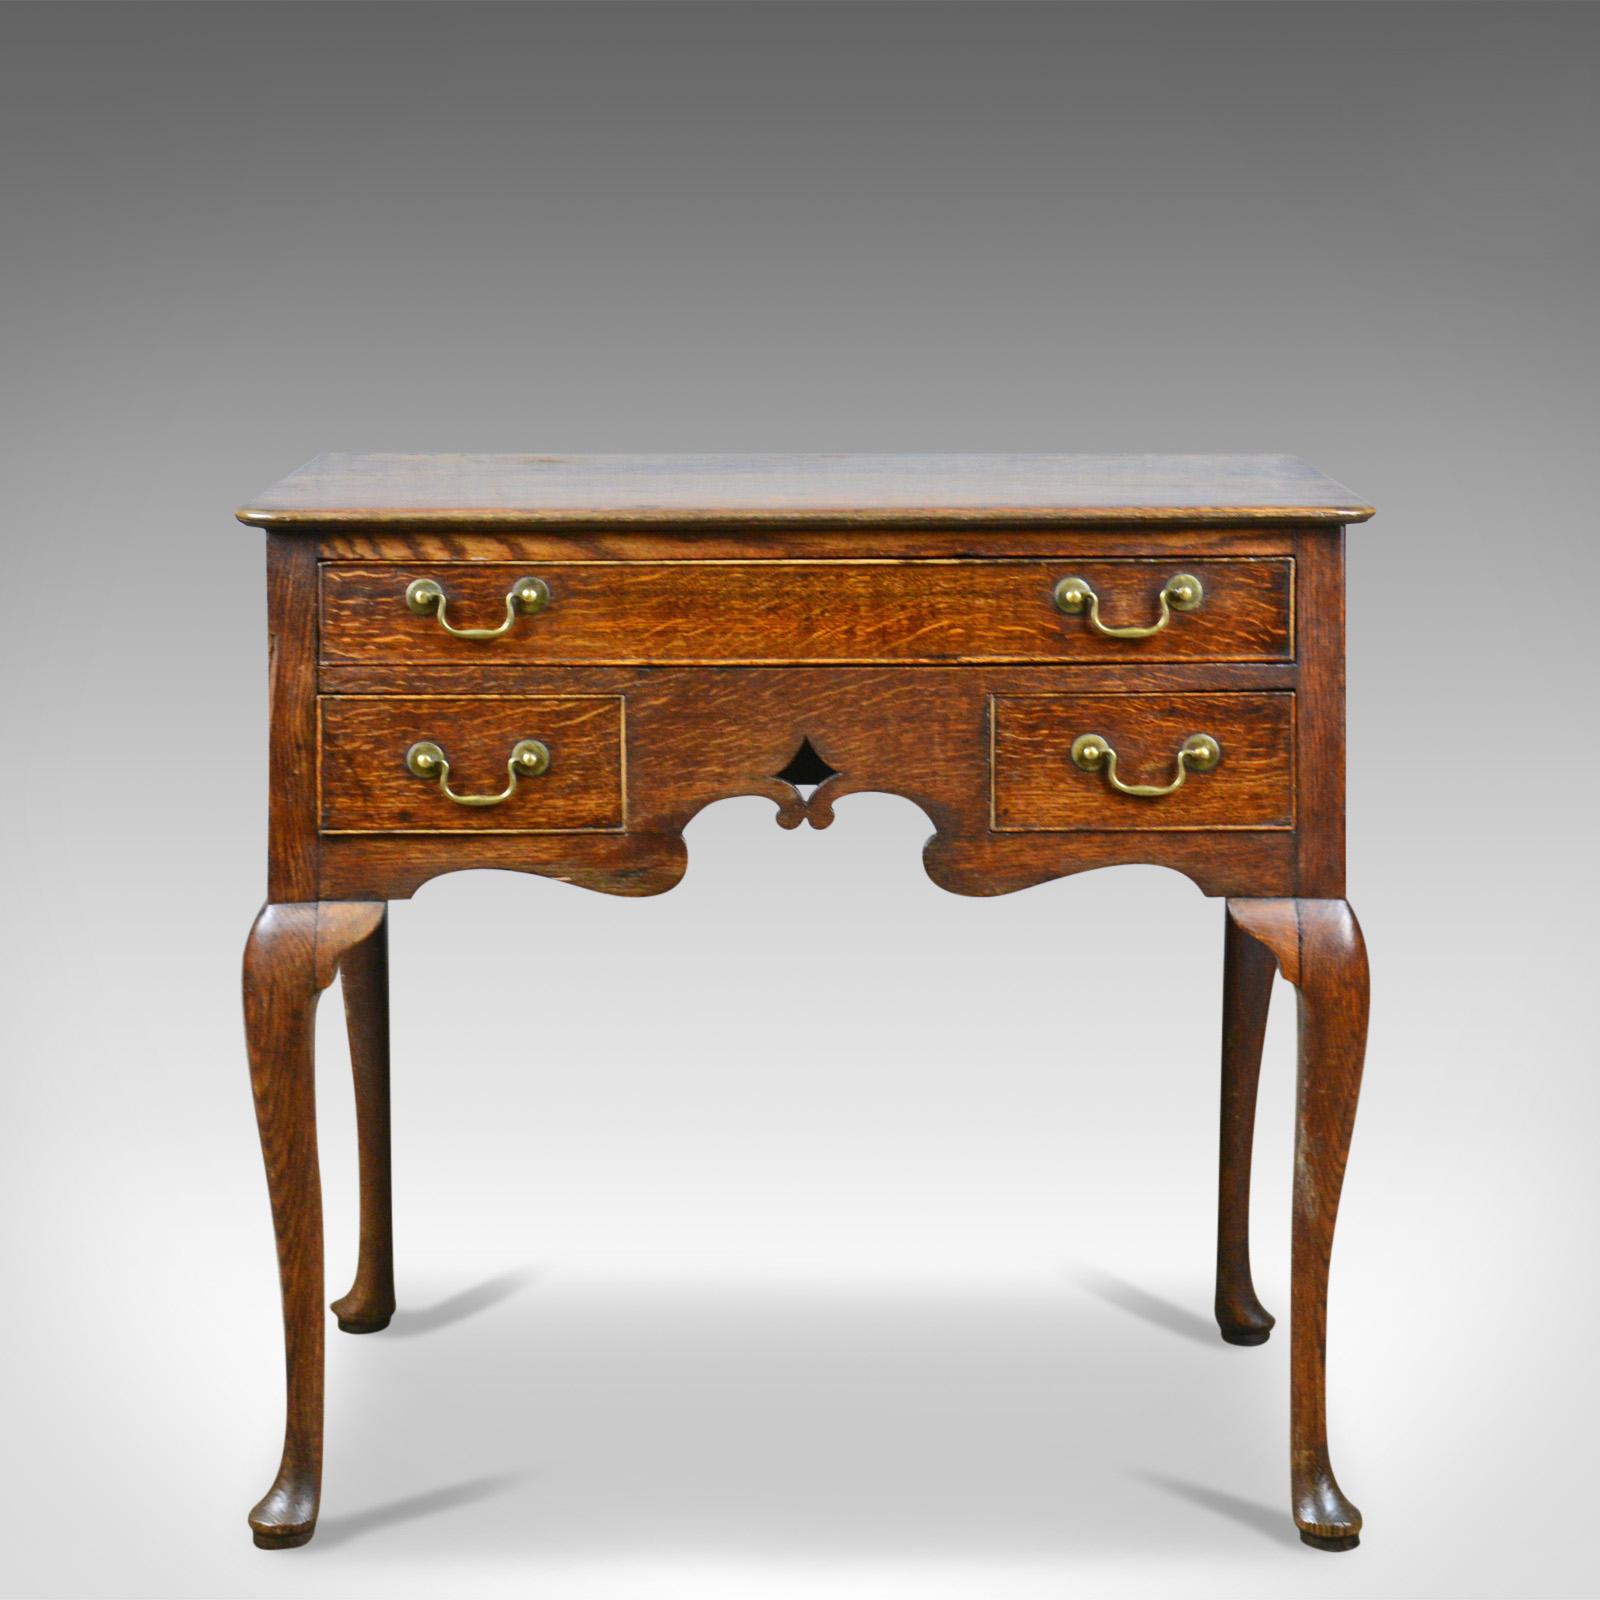 This is an antique lowboy, an English, late Georgian, oak table dating to the late 18th century, circa 1780.

Attractive golden hues to the wax polished oak
Good, consistent colour and grain interest throughout
Displaying wisps of medullary